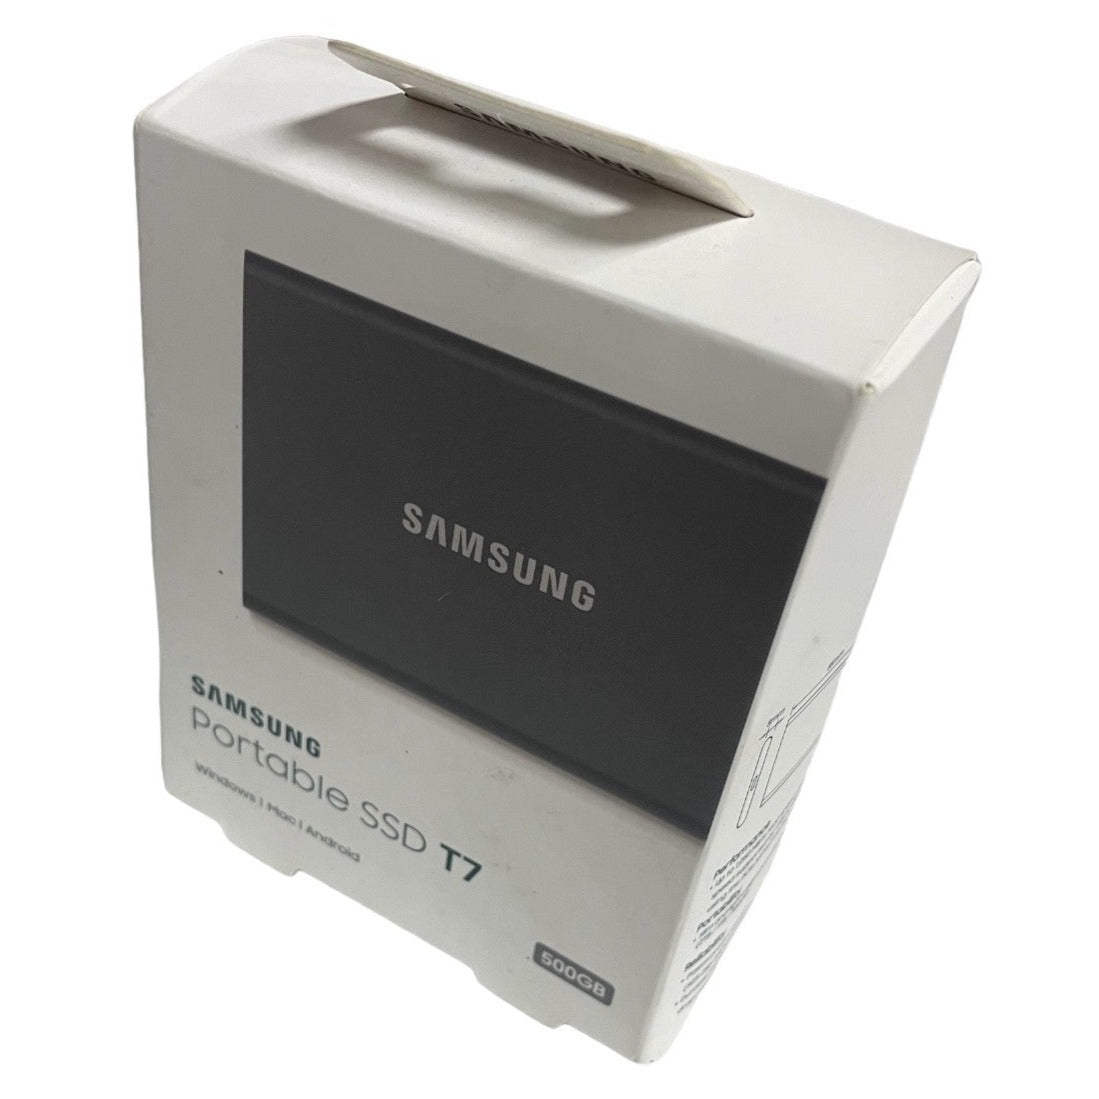 Samsung Portable SSD T7 500GB For Windows, Mac, Android, Model MU-PC500T